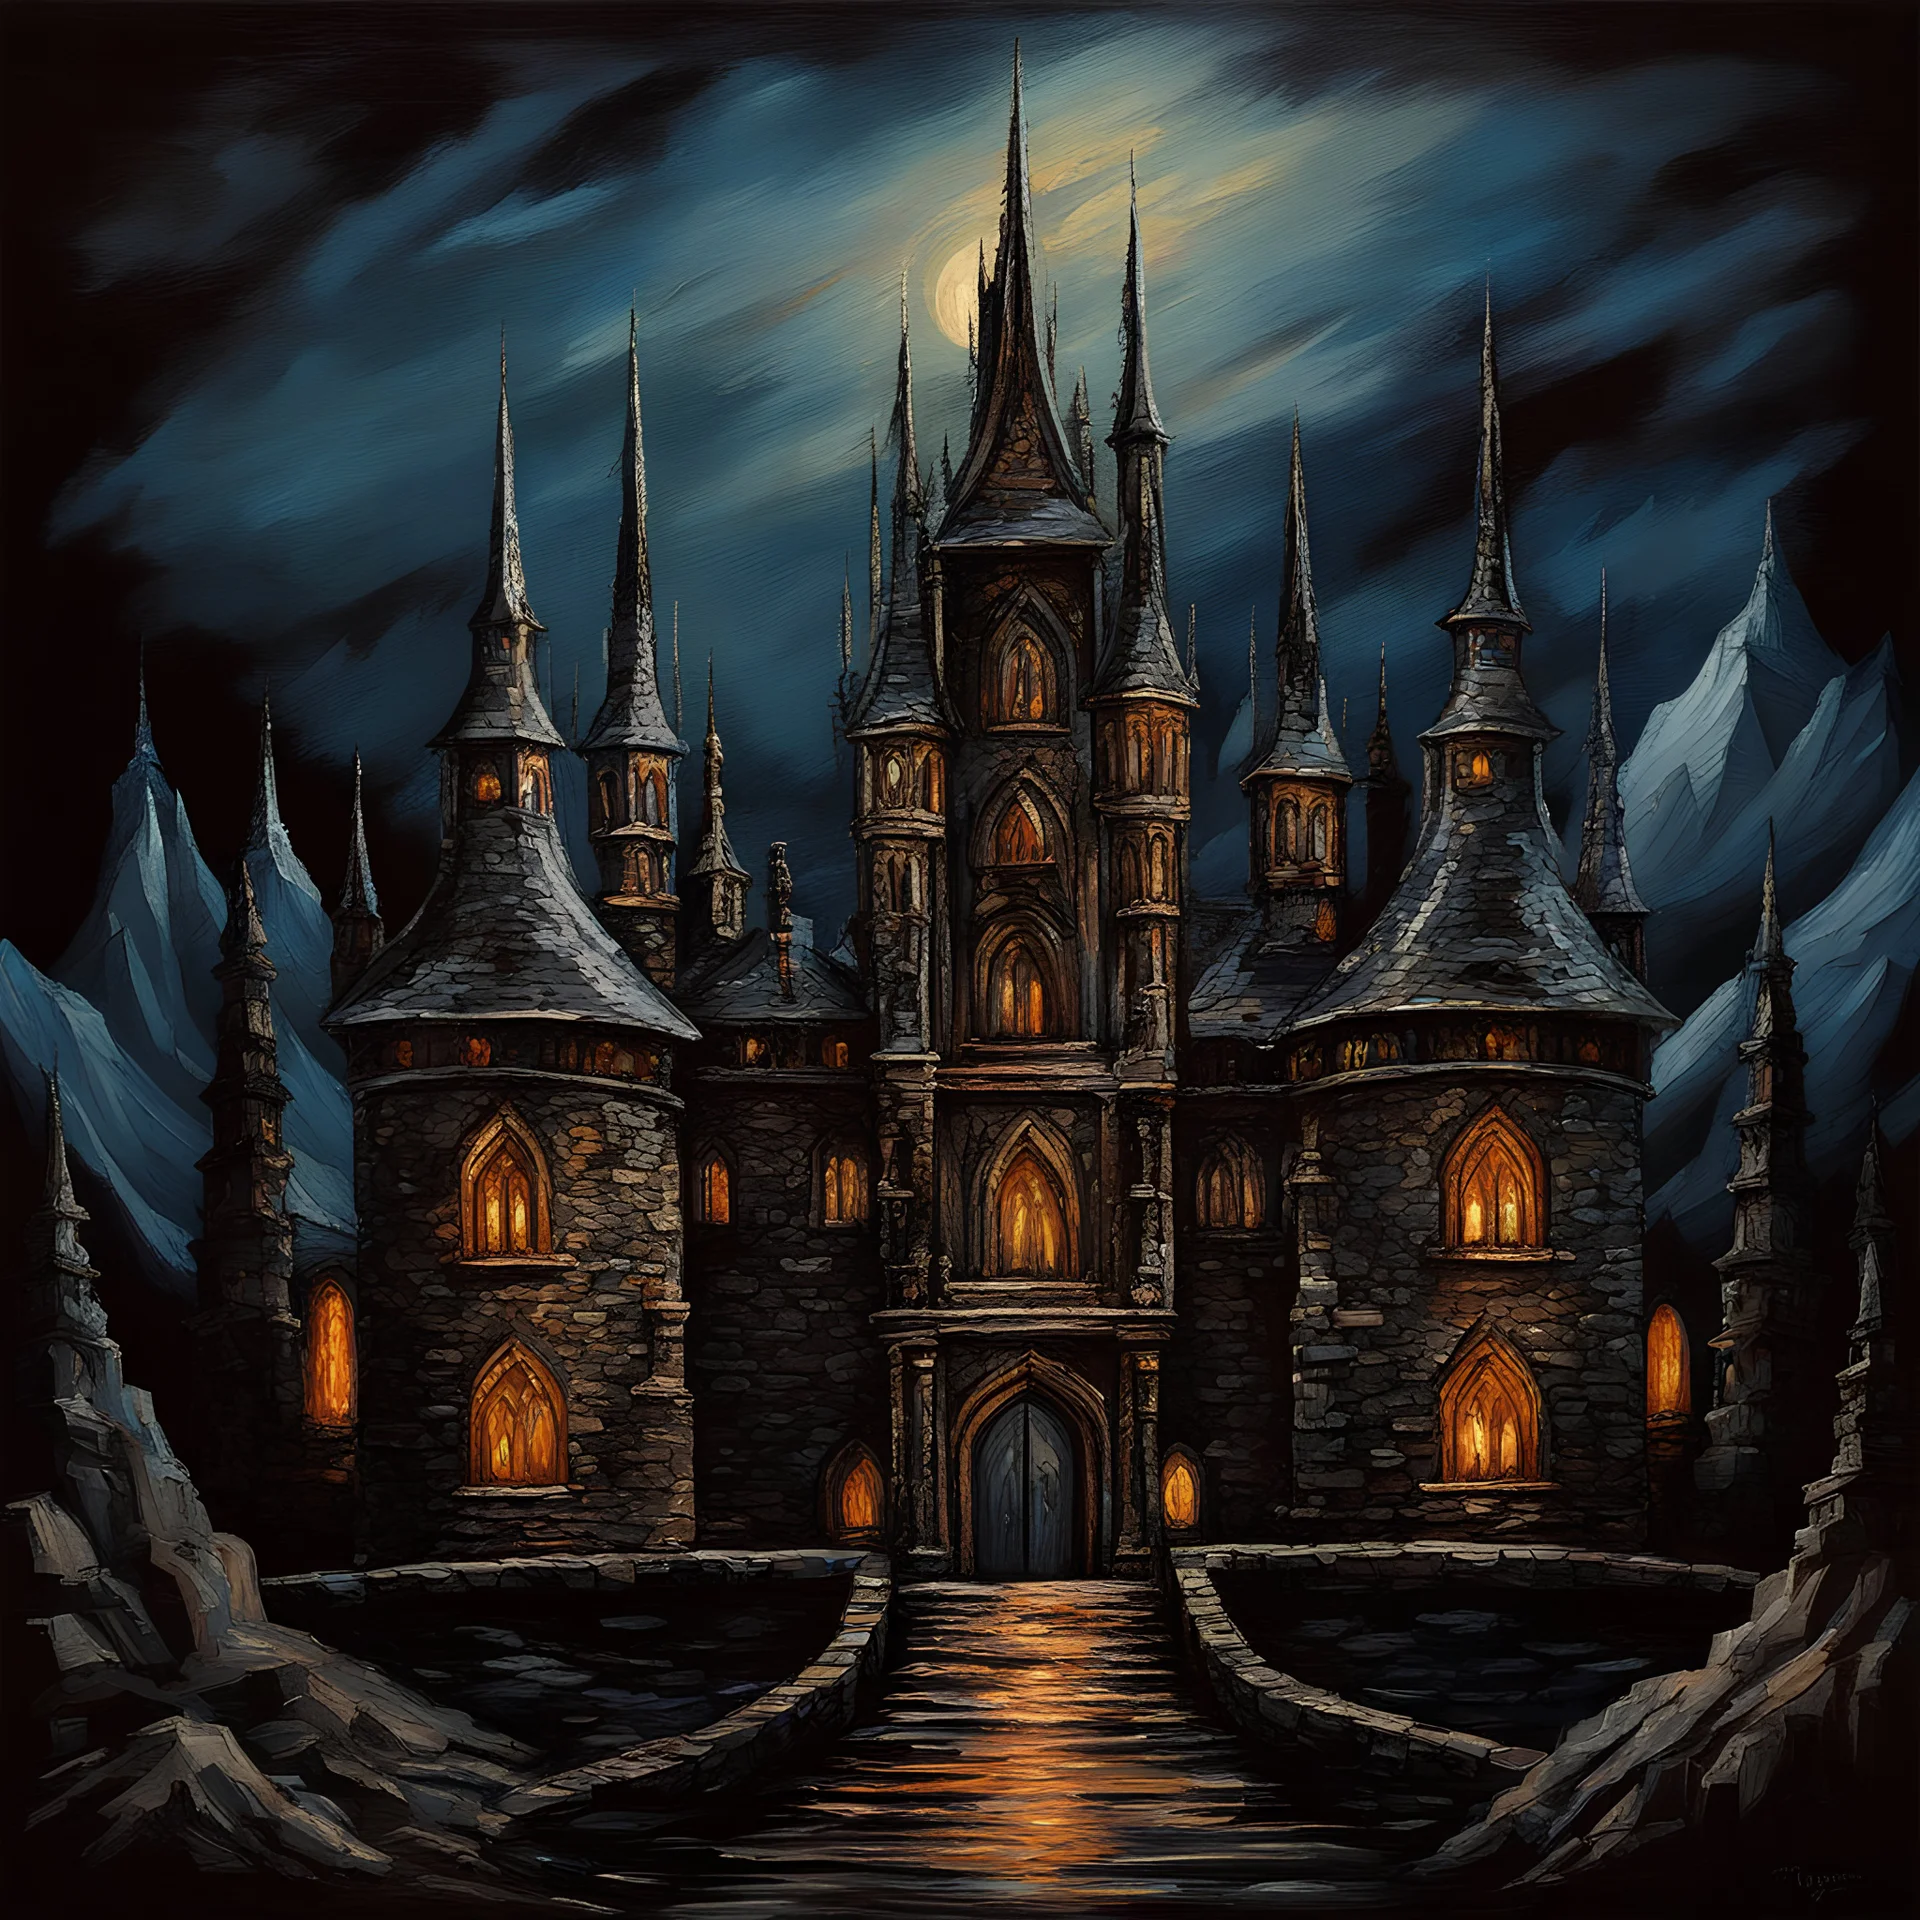 olpntng style, Large dark gothic ornate symmetrical castle with towers and spires in the mountains in the night, oil painting, heavy strokes, paint dripping